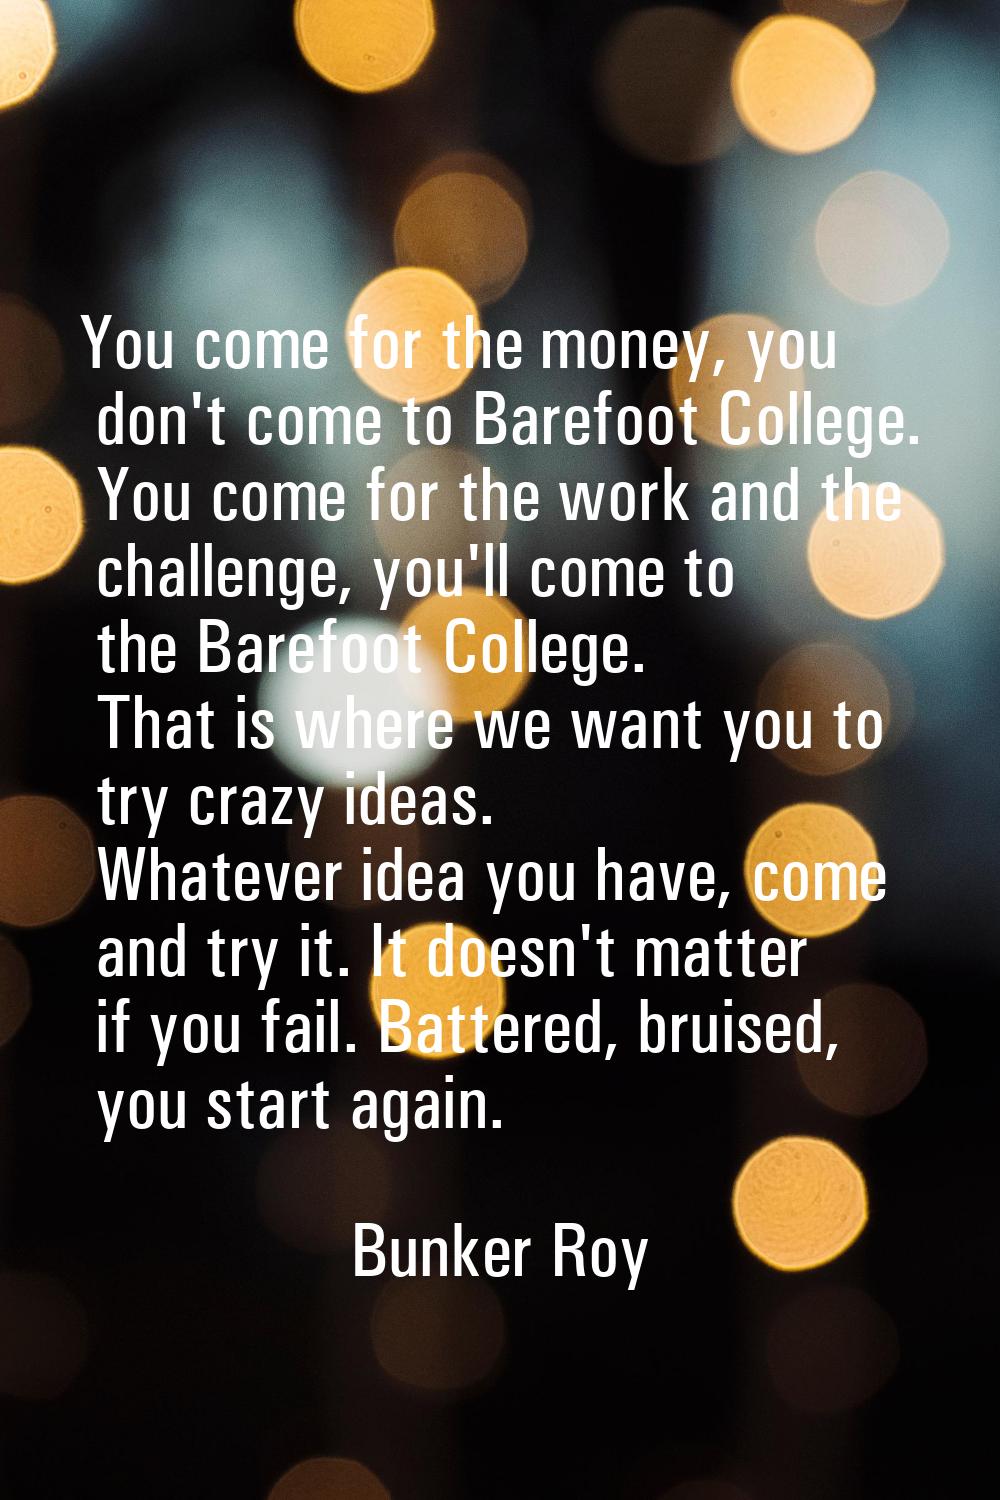 You come for the money, you don't come to Barefoot College. You come for the work and the challenge